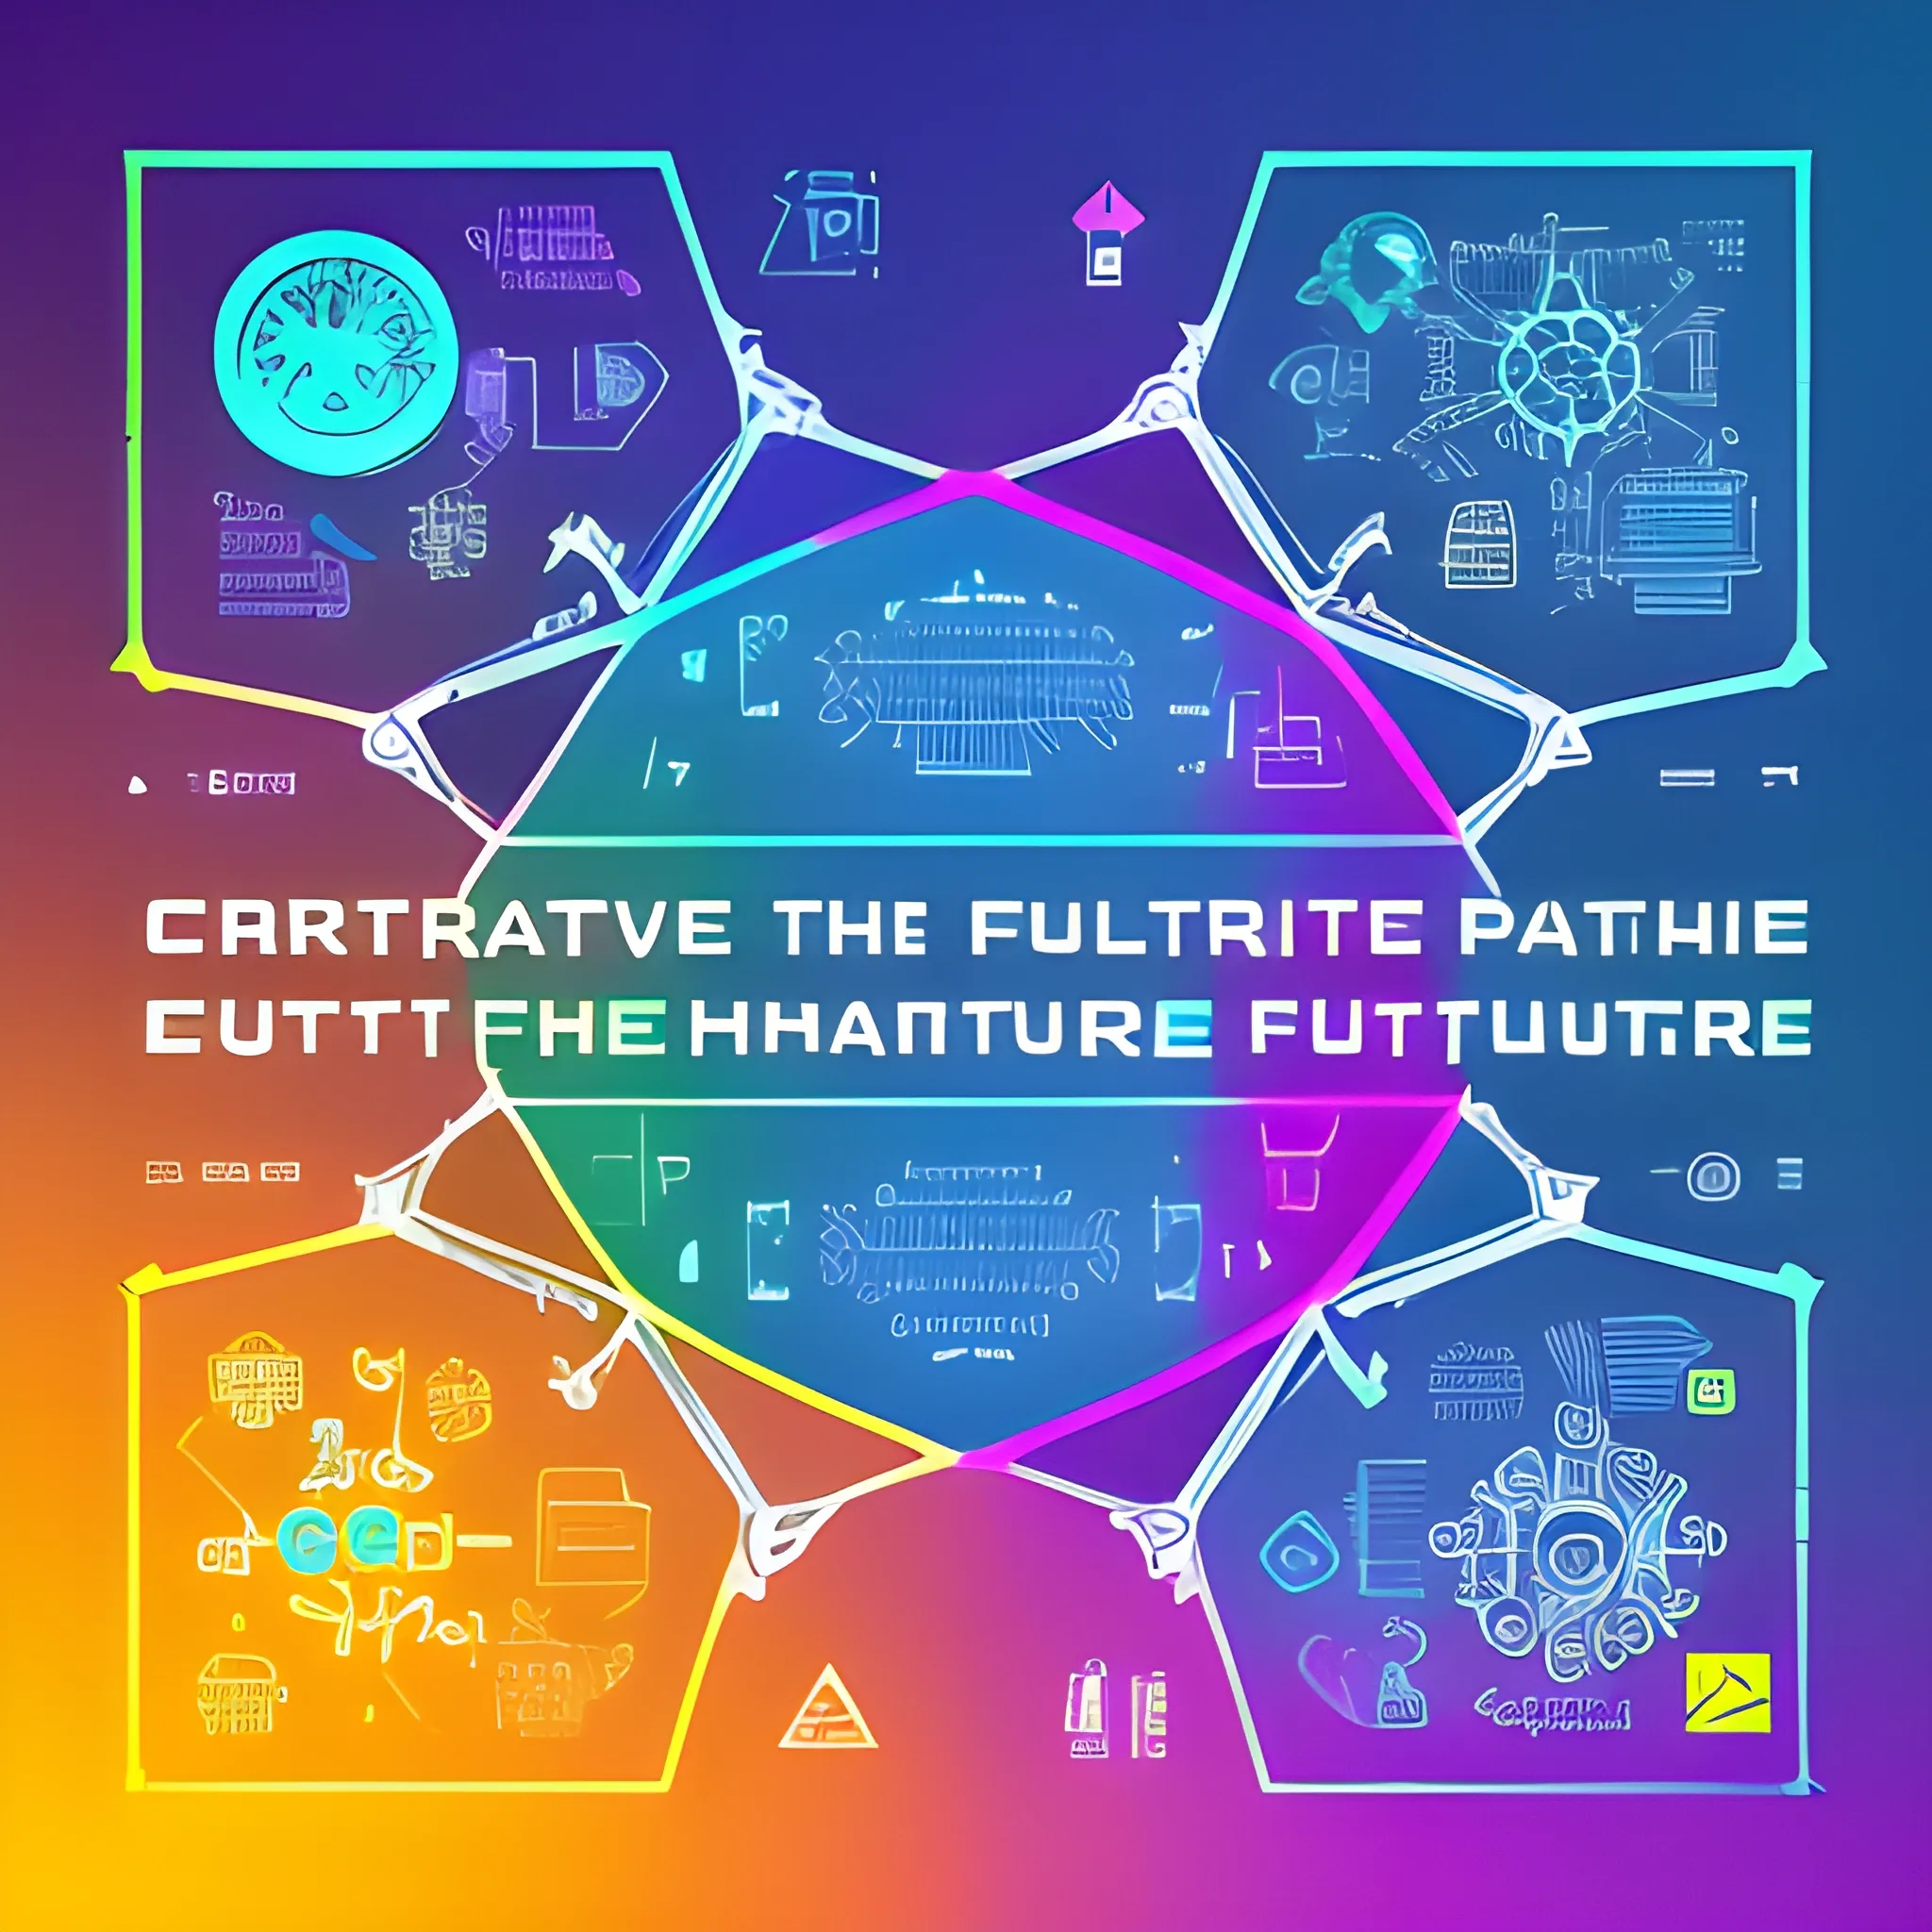 Generate a corporative, future, colorful, modern image, creative, related to digital products, do not use machines or txt and use really environment, with this concept: “Polymath thinkers of the future”.